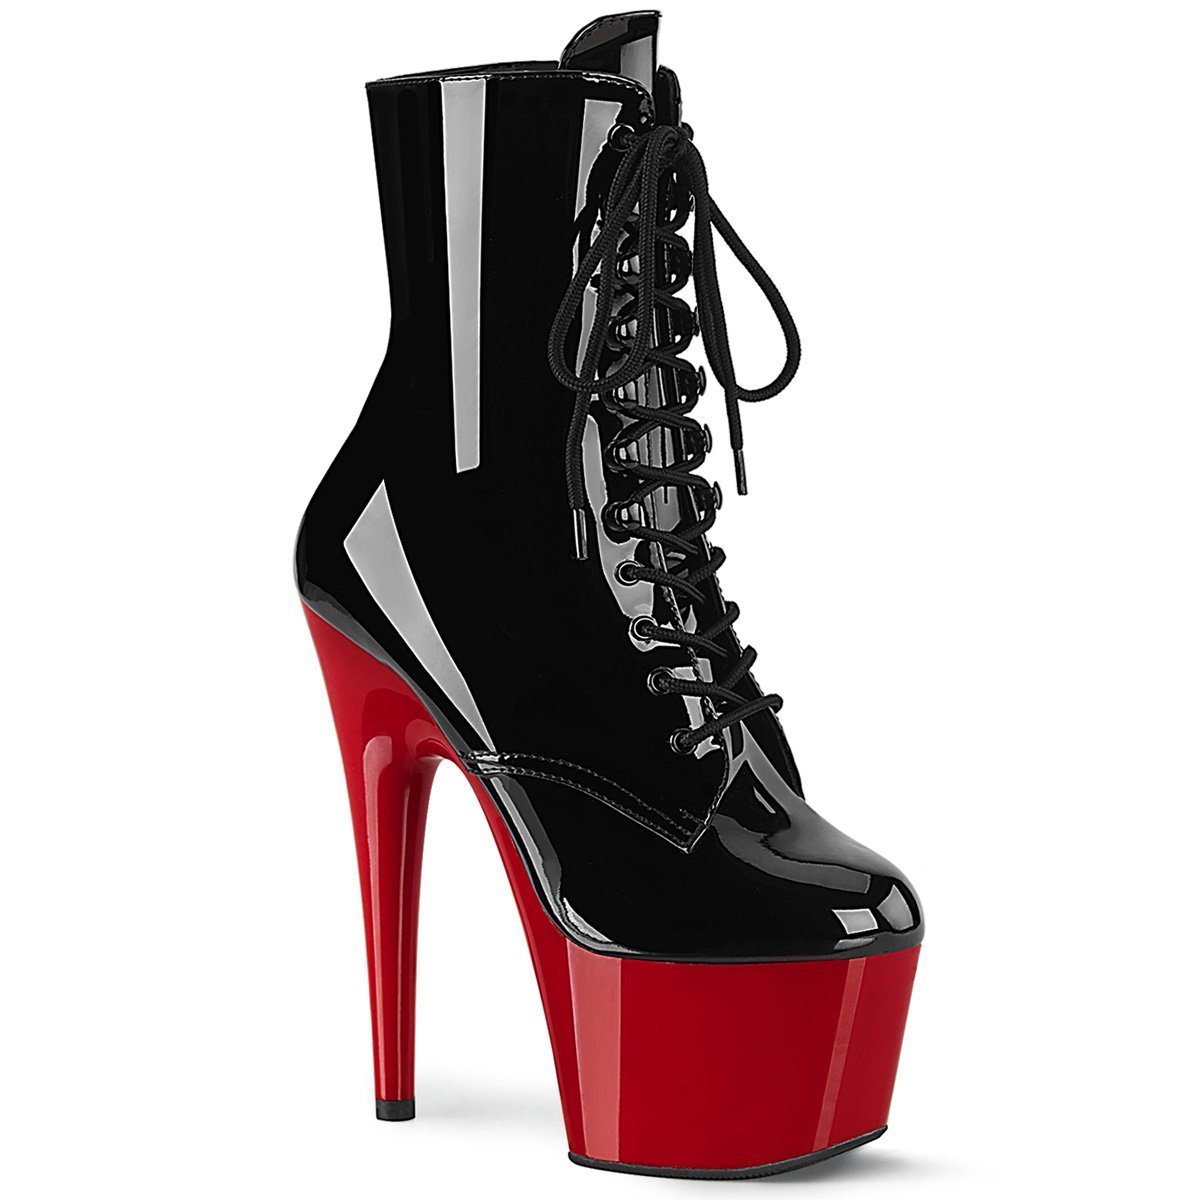 Pleaser Adore-1020 Boots | Buy Sexy Shoes at Shoefreaks.ca